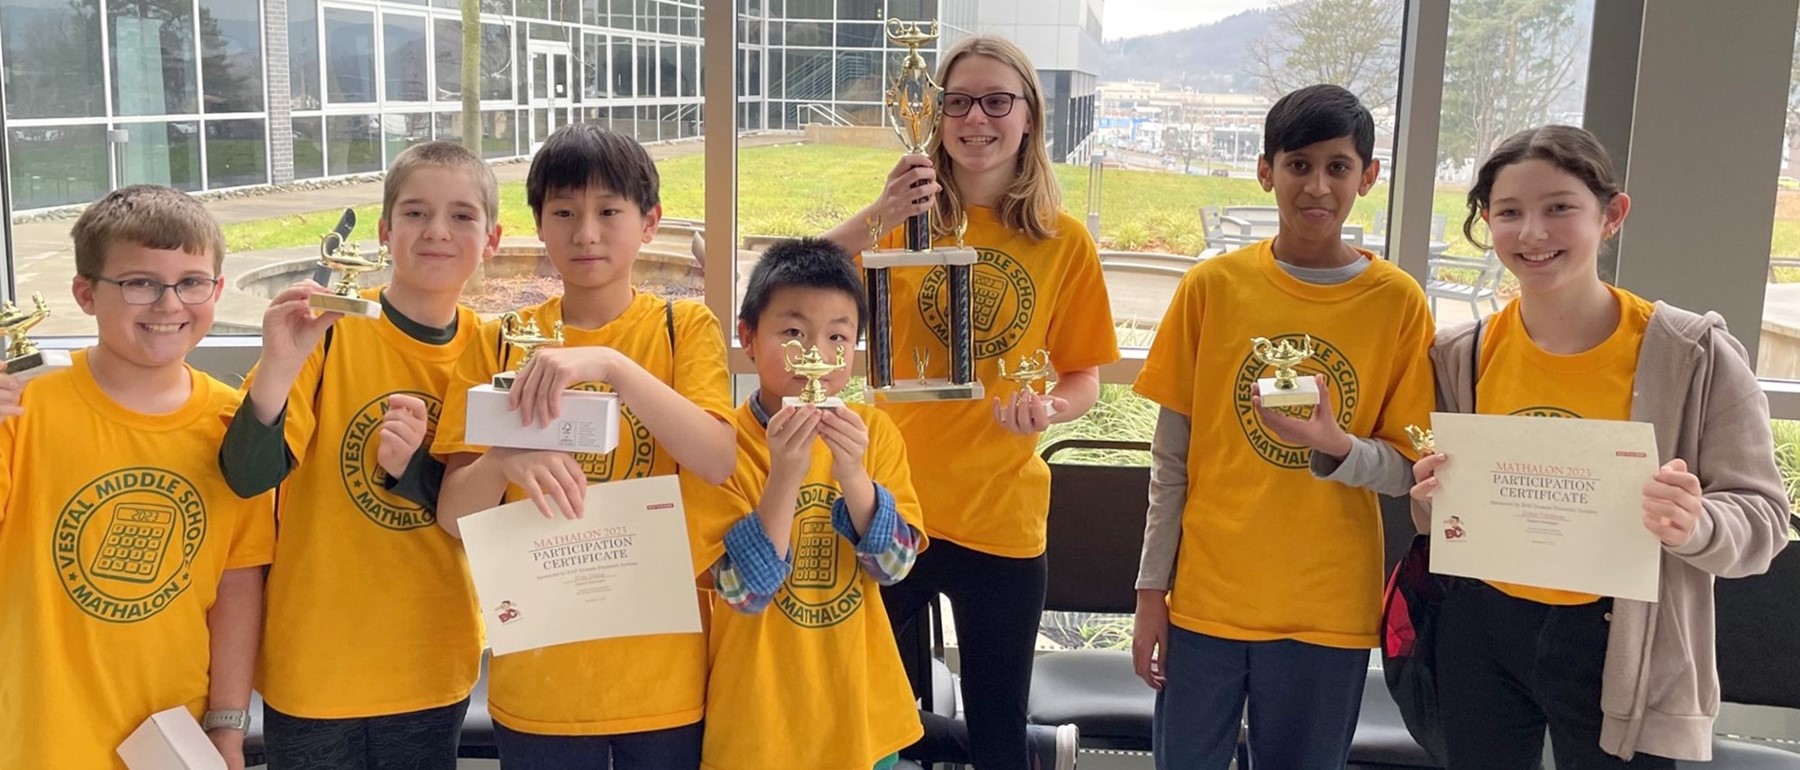 Seven members of the Vestal Middle School&#39;s first-place Mathalon team hold their trophies.